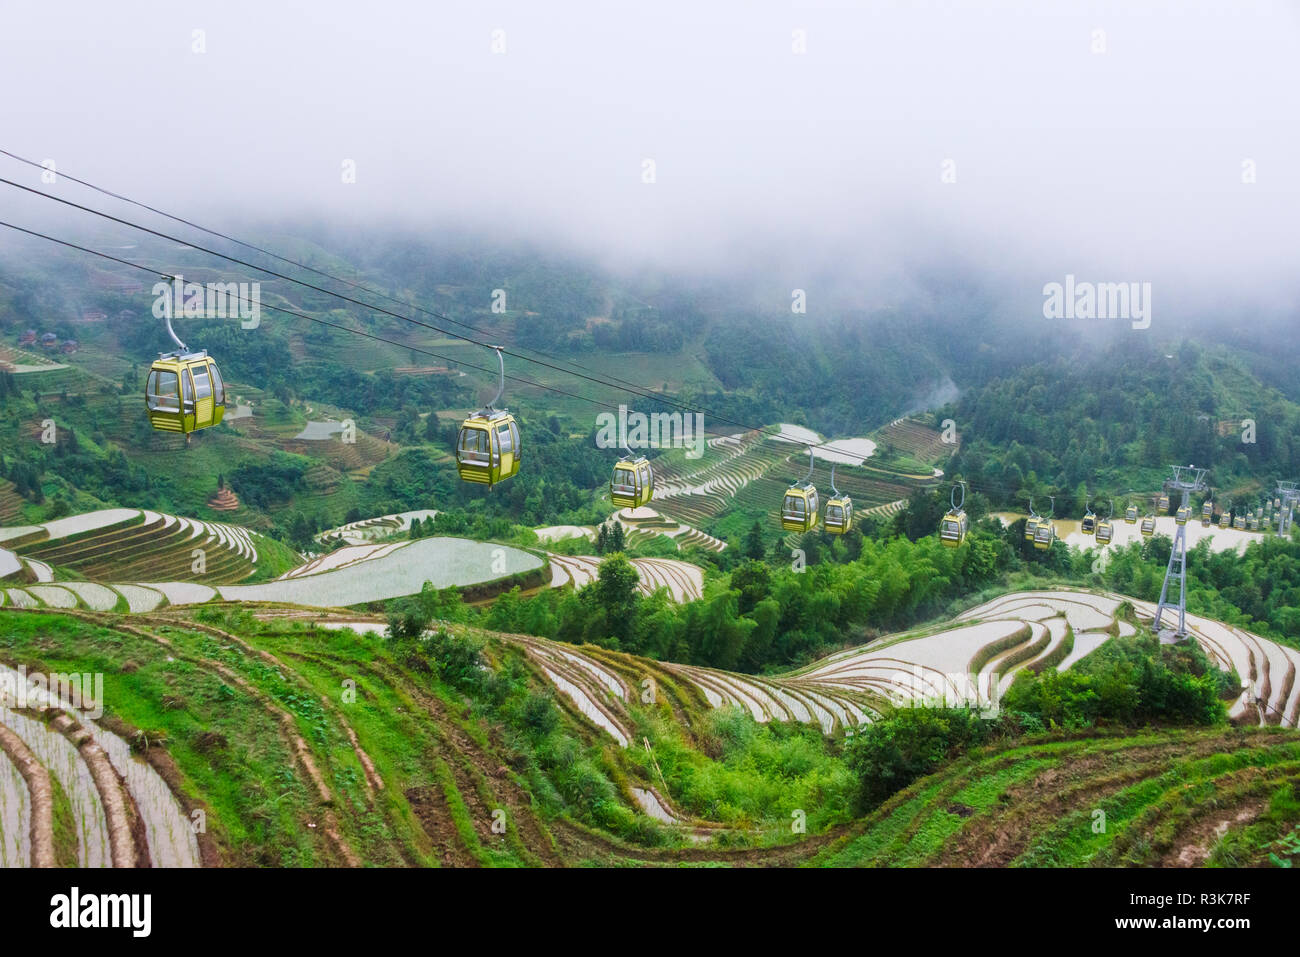 Cable car above the rice terraces in the mountain, Dazhai, Guangxi Province, China Stock Photo